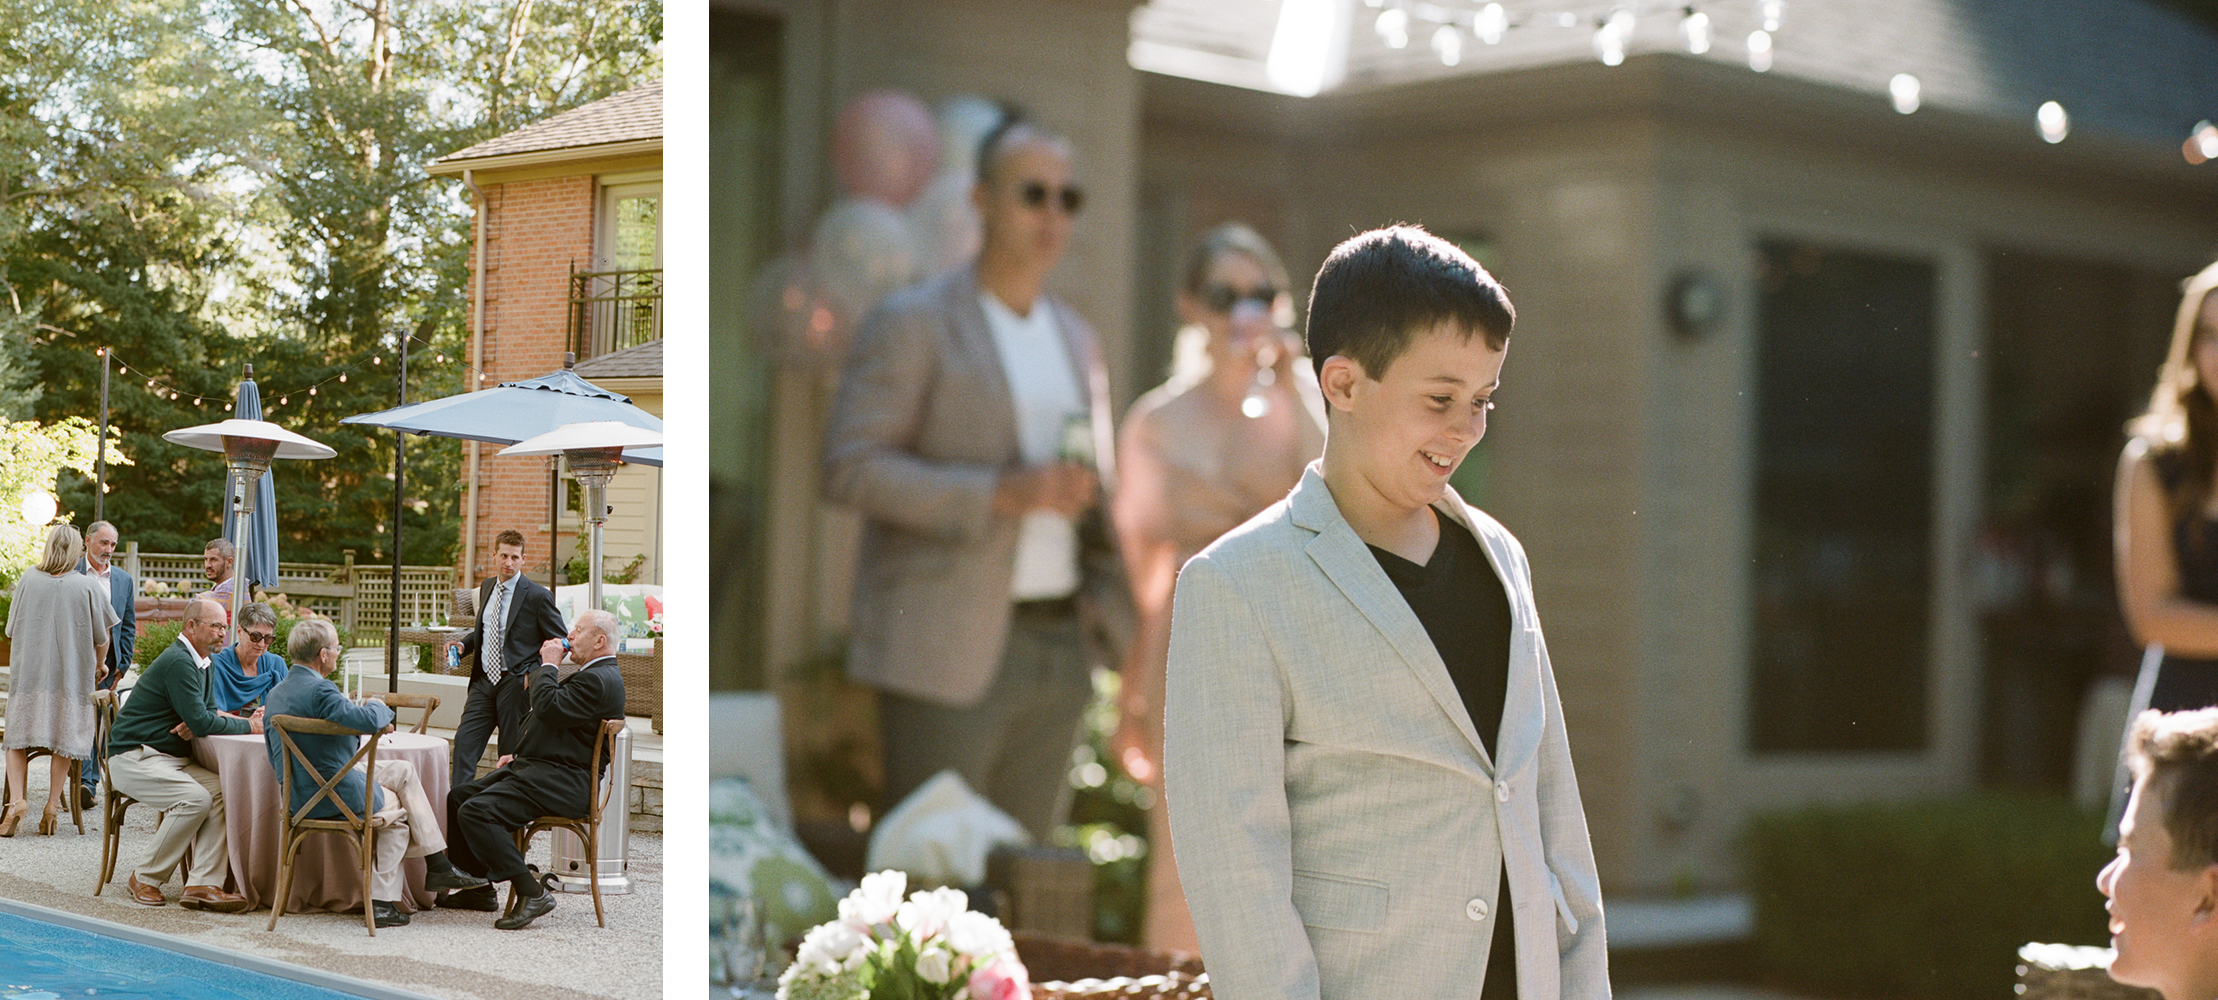 Backyard-Elopement-on-Film-Analog-Pool-Party-96.PNG